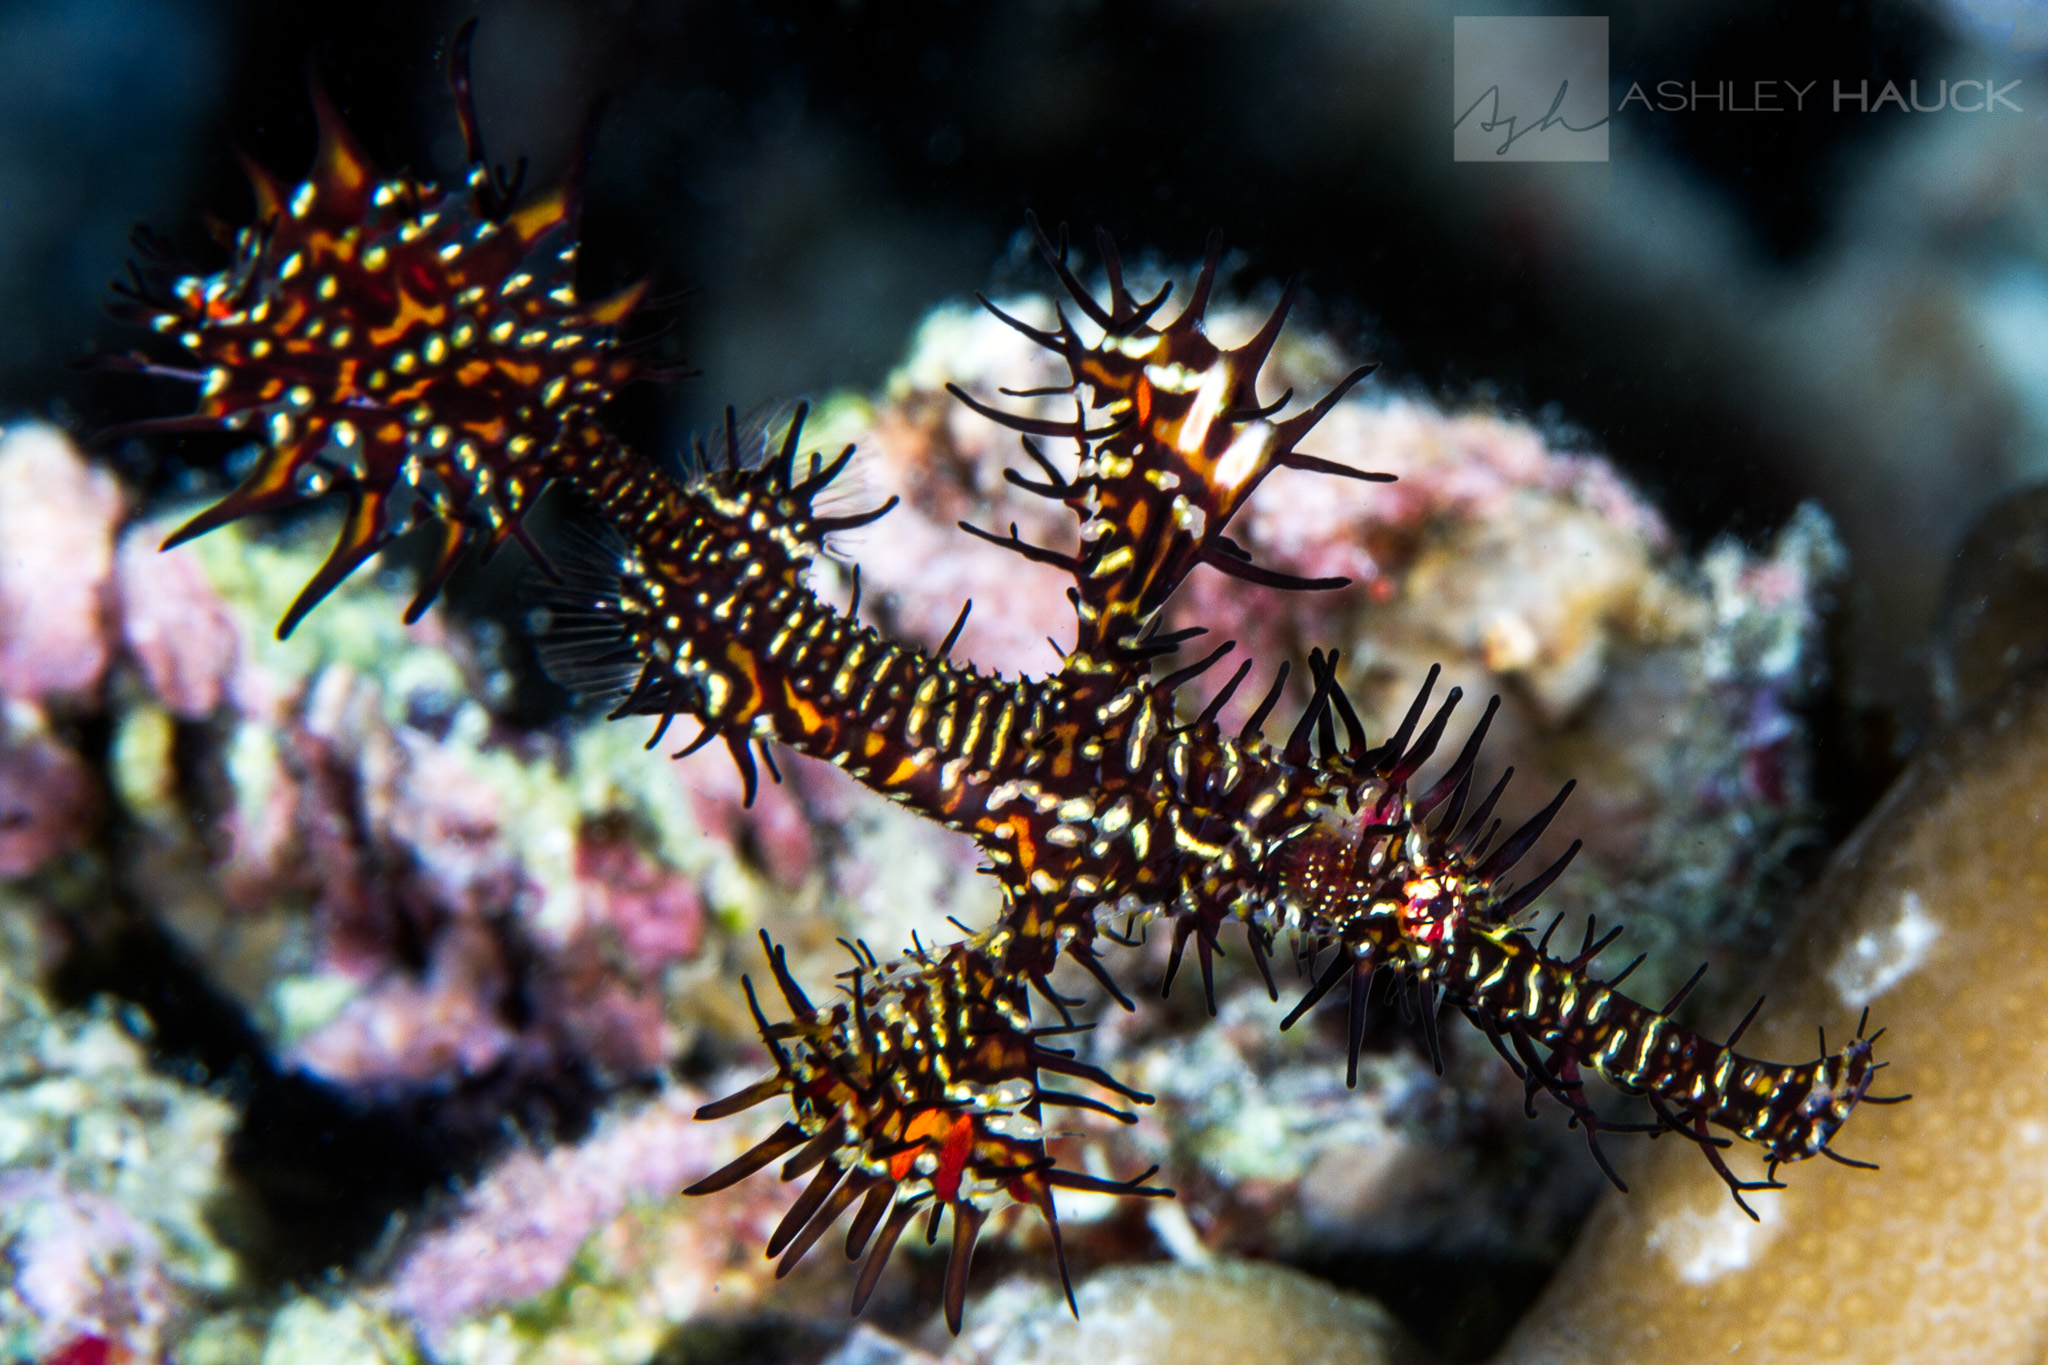 A Limerick about the Ornate Ghost Pipefish